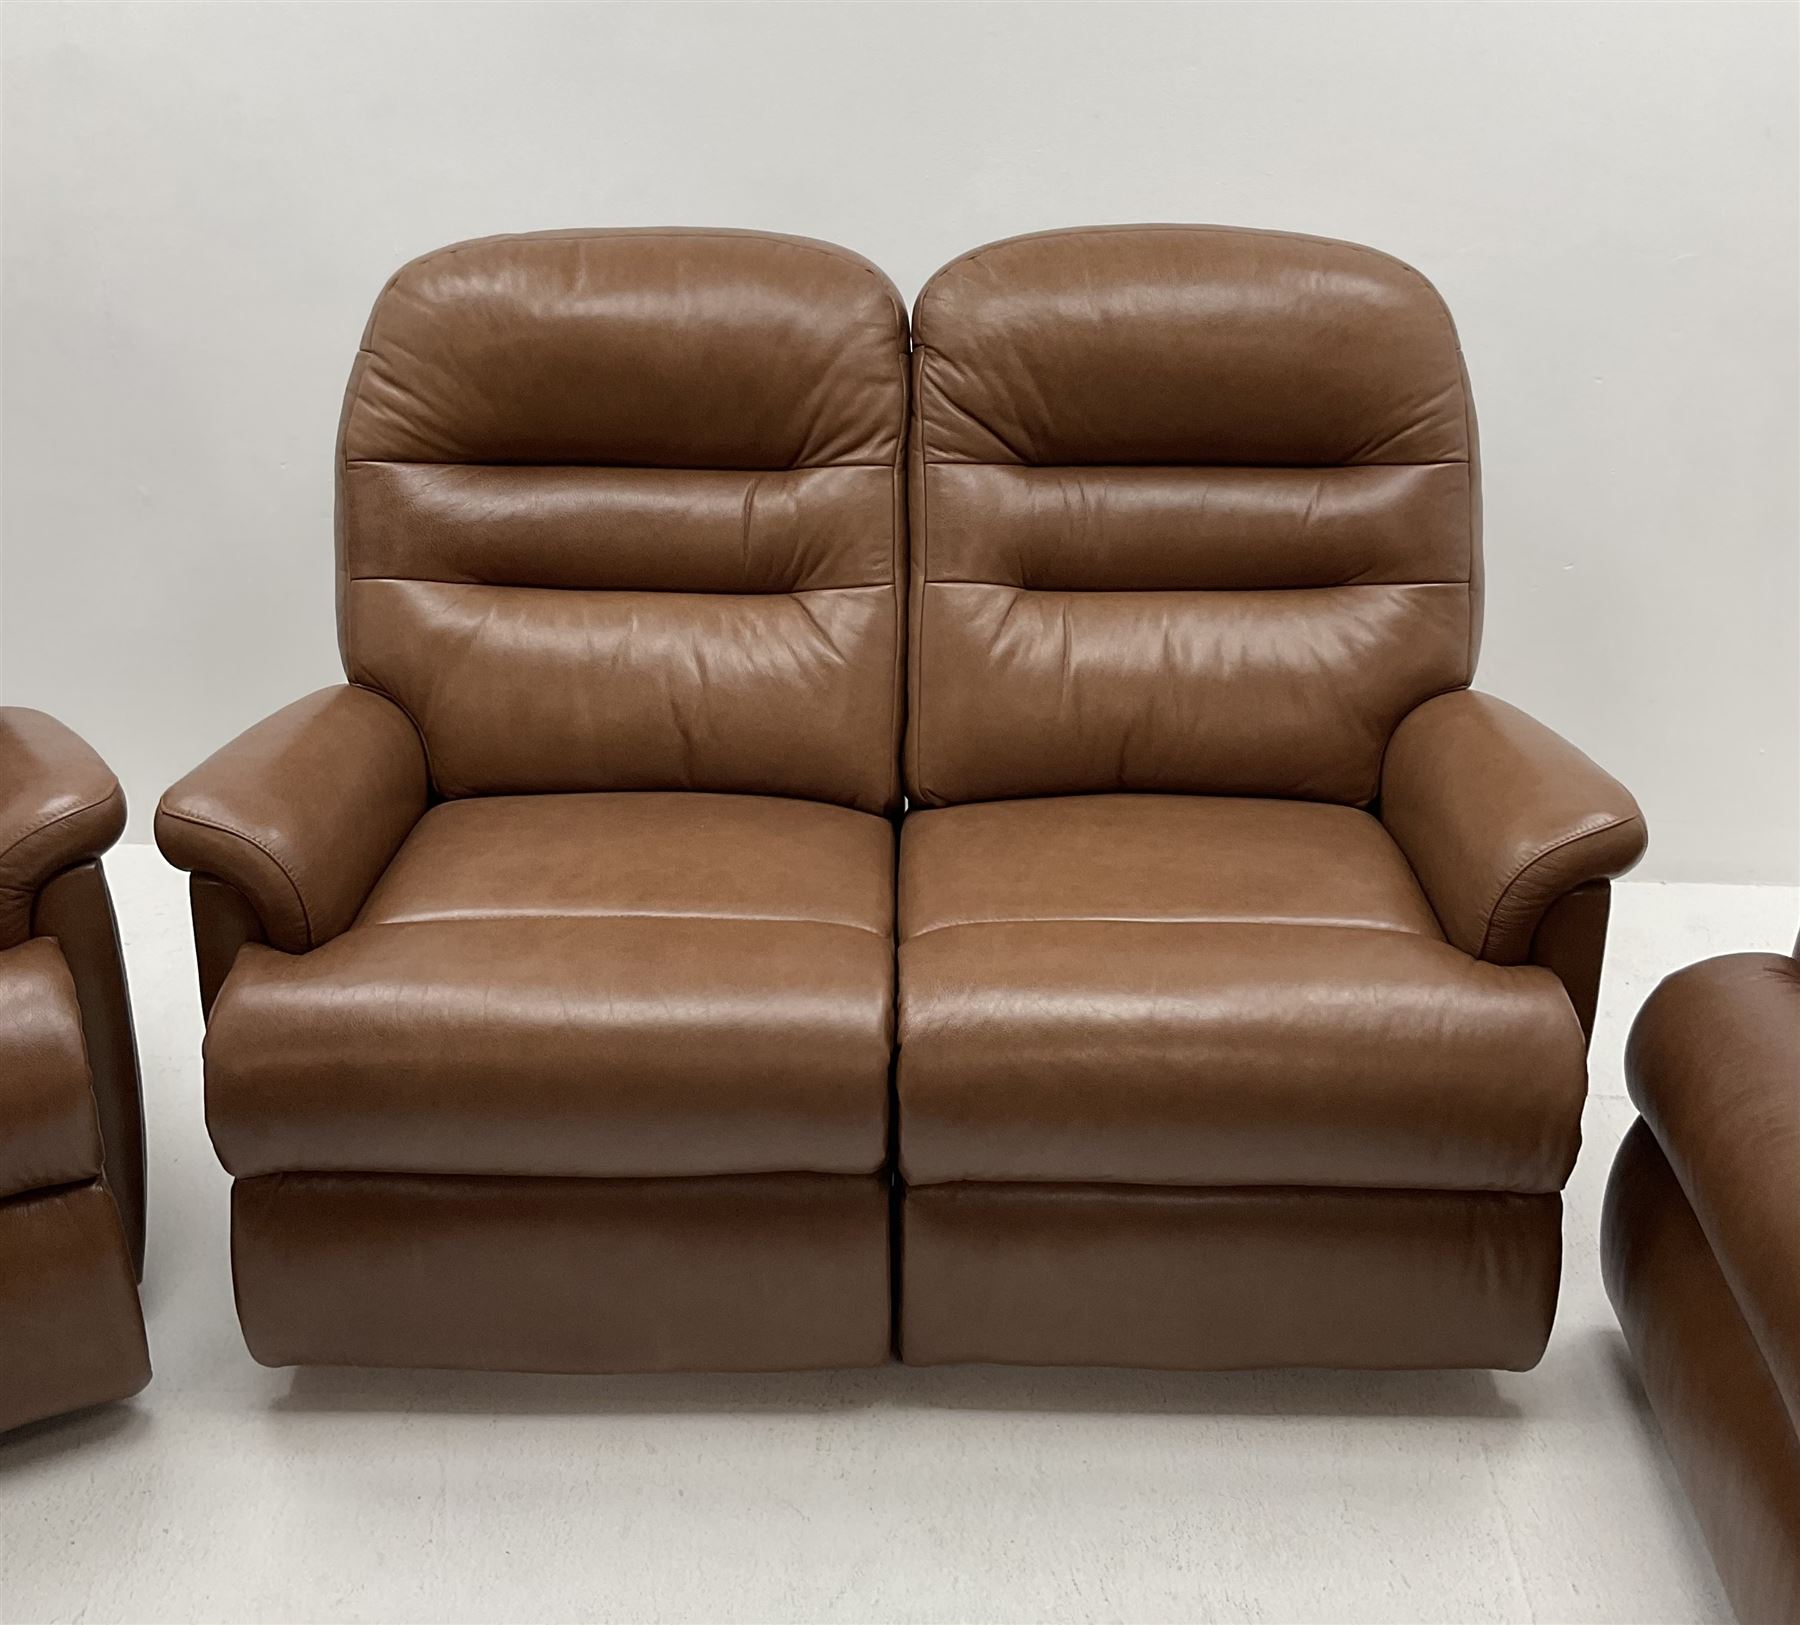 Sherborne three piece lounge suite upholstered in light brown leather � two seat sofa (W145cm) - Image 2 of 5